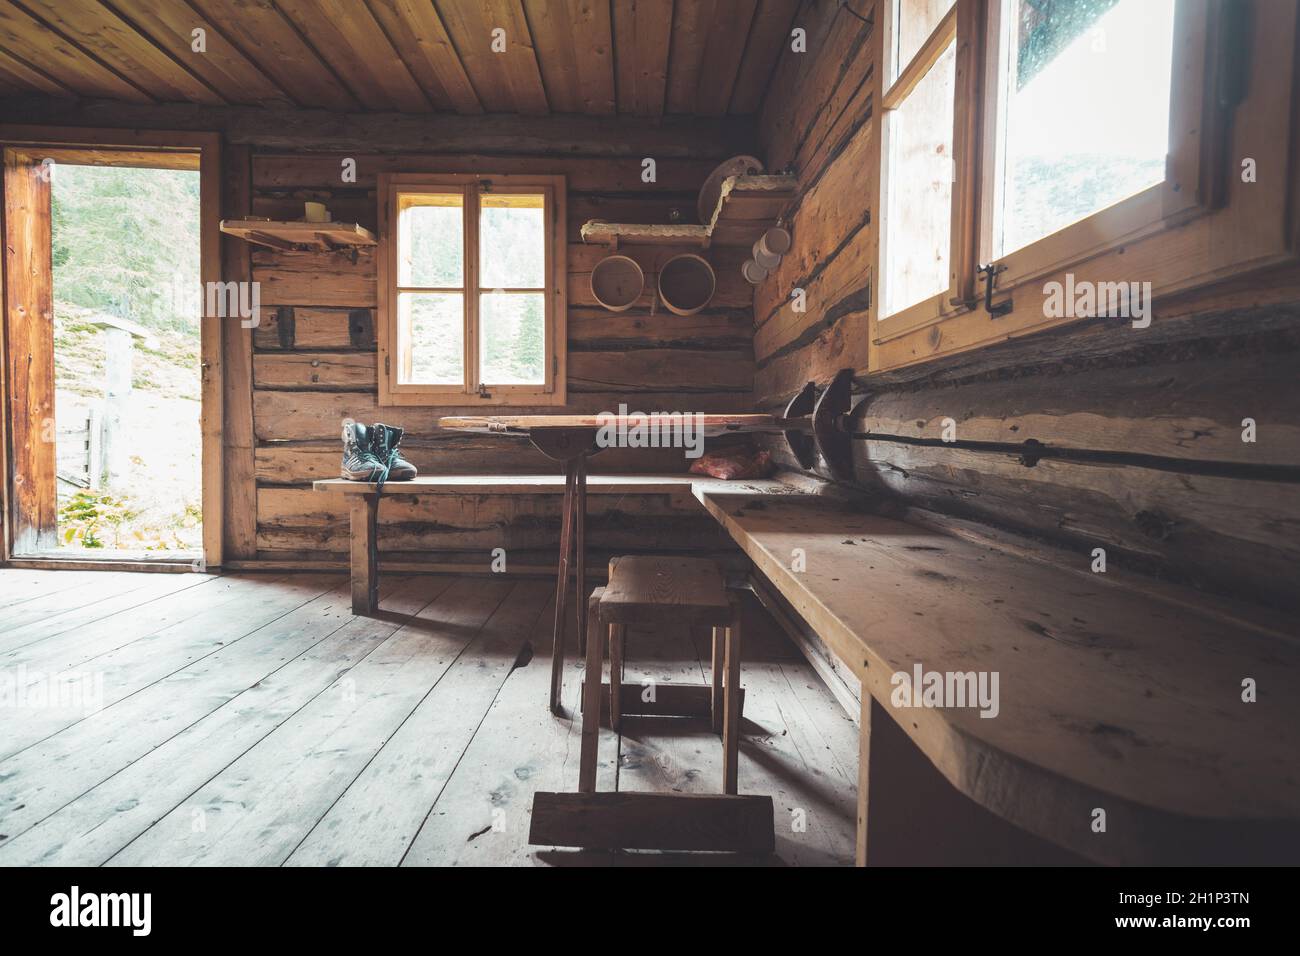 Interior of an old rustic abandoned alpine chalet in Austria Stock Photo